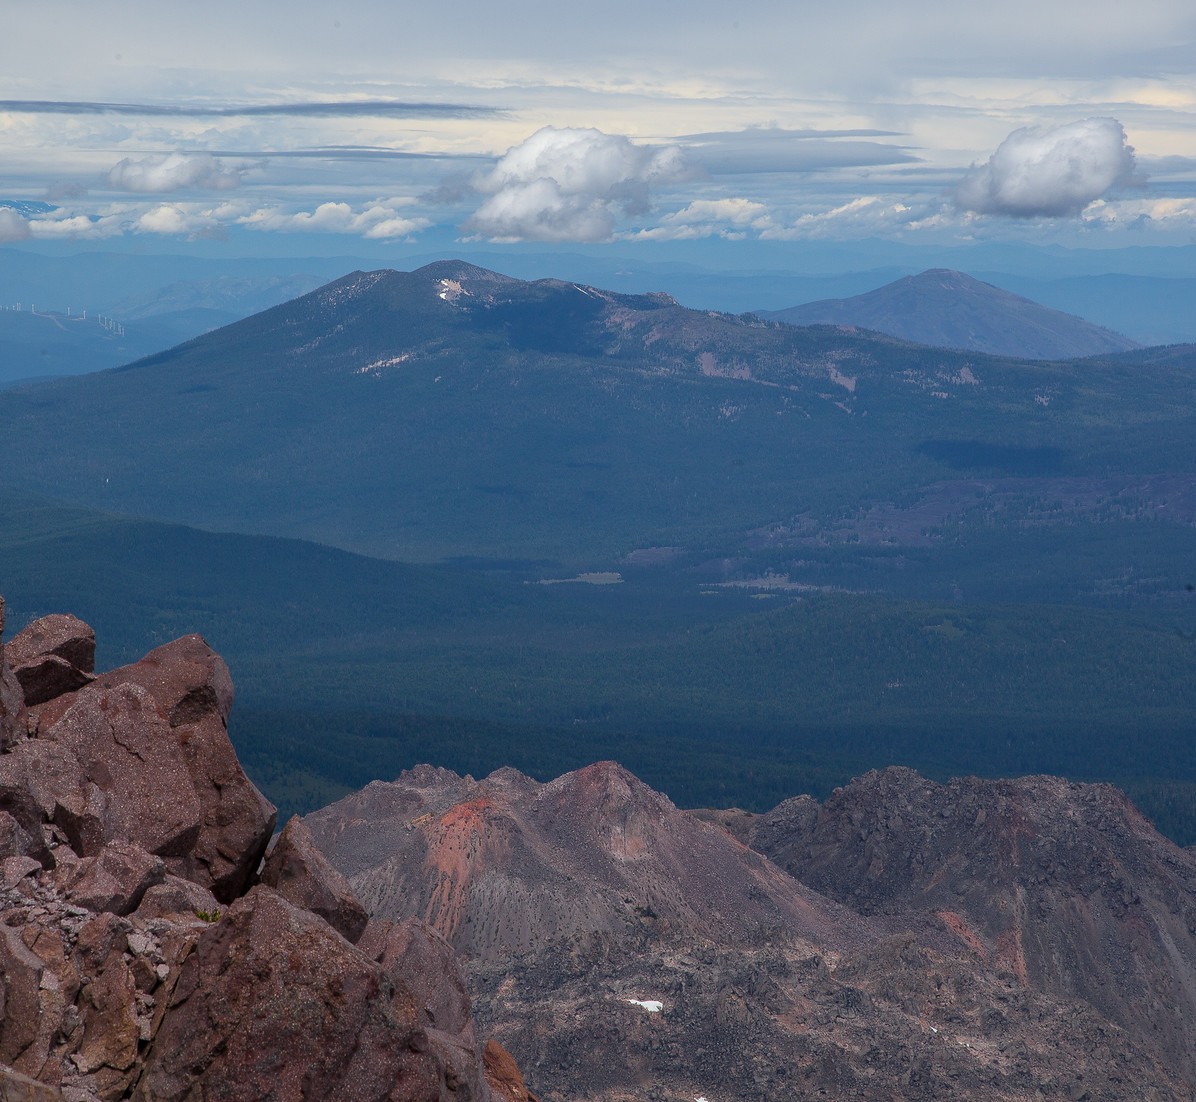 Lassen Peak. Looking to the north from the summit.